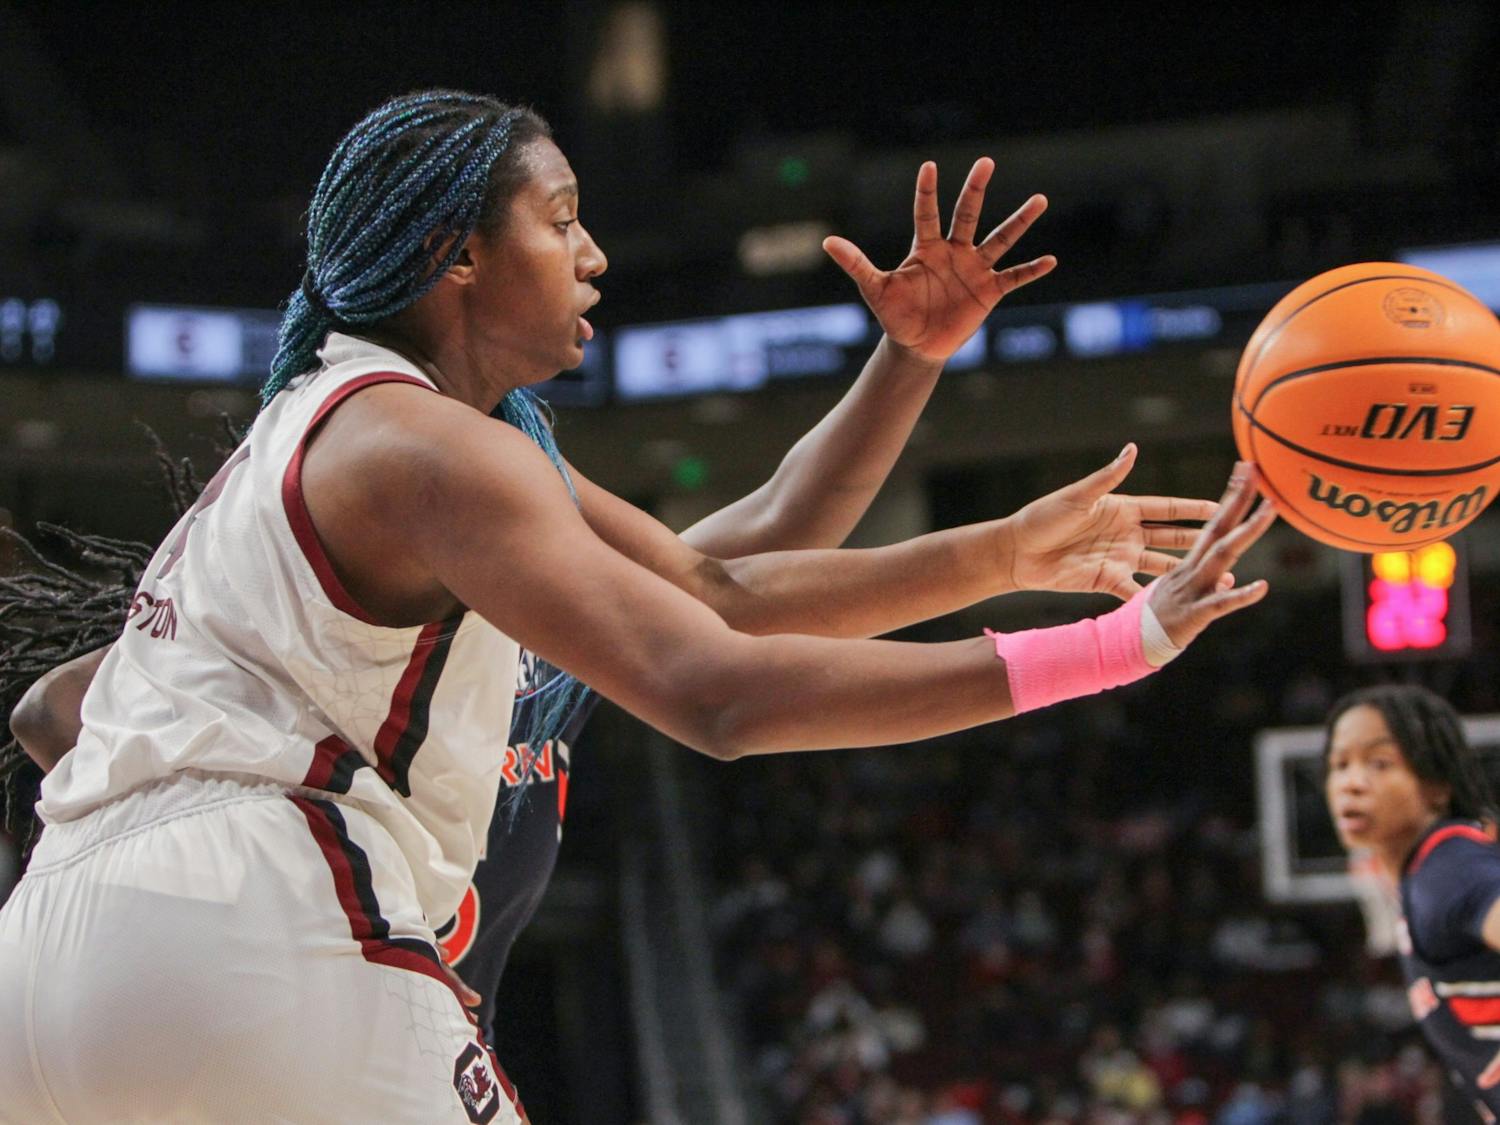 Junior forward Aliyah Boston receives a pass during a game on Feb. 17, 2022 at Colonial Life Arena in Columbia, SC. The Gamecocks beat Auburn 75-38.